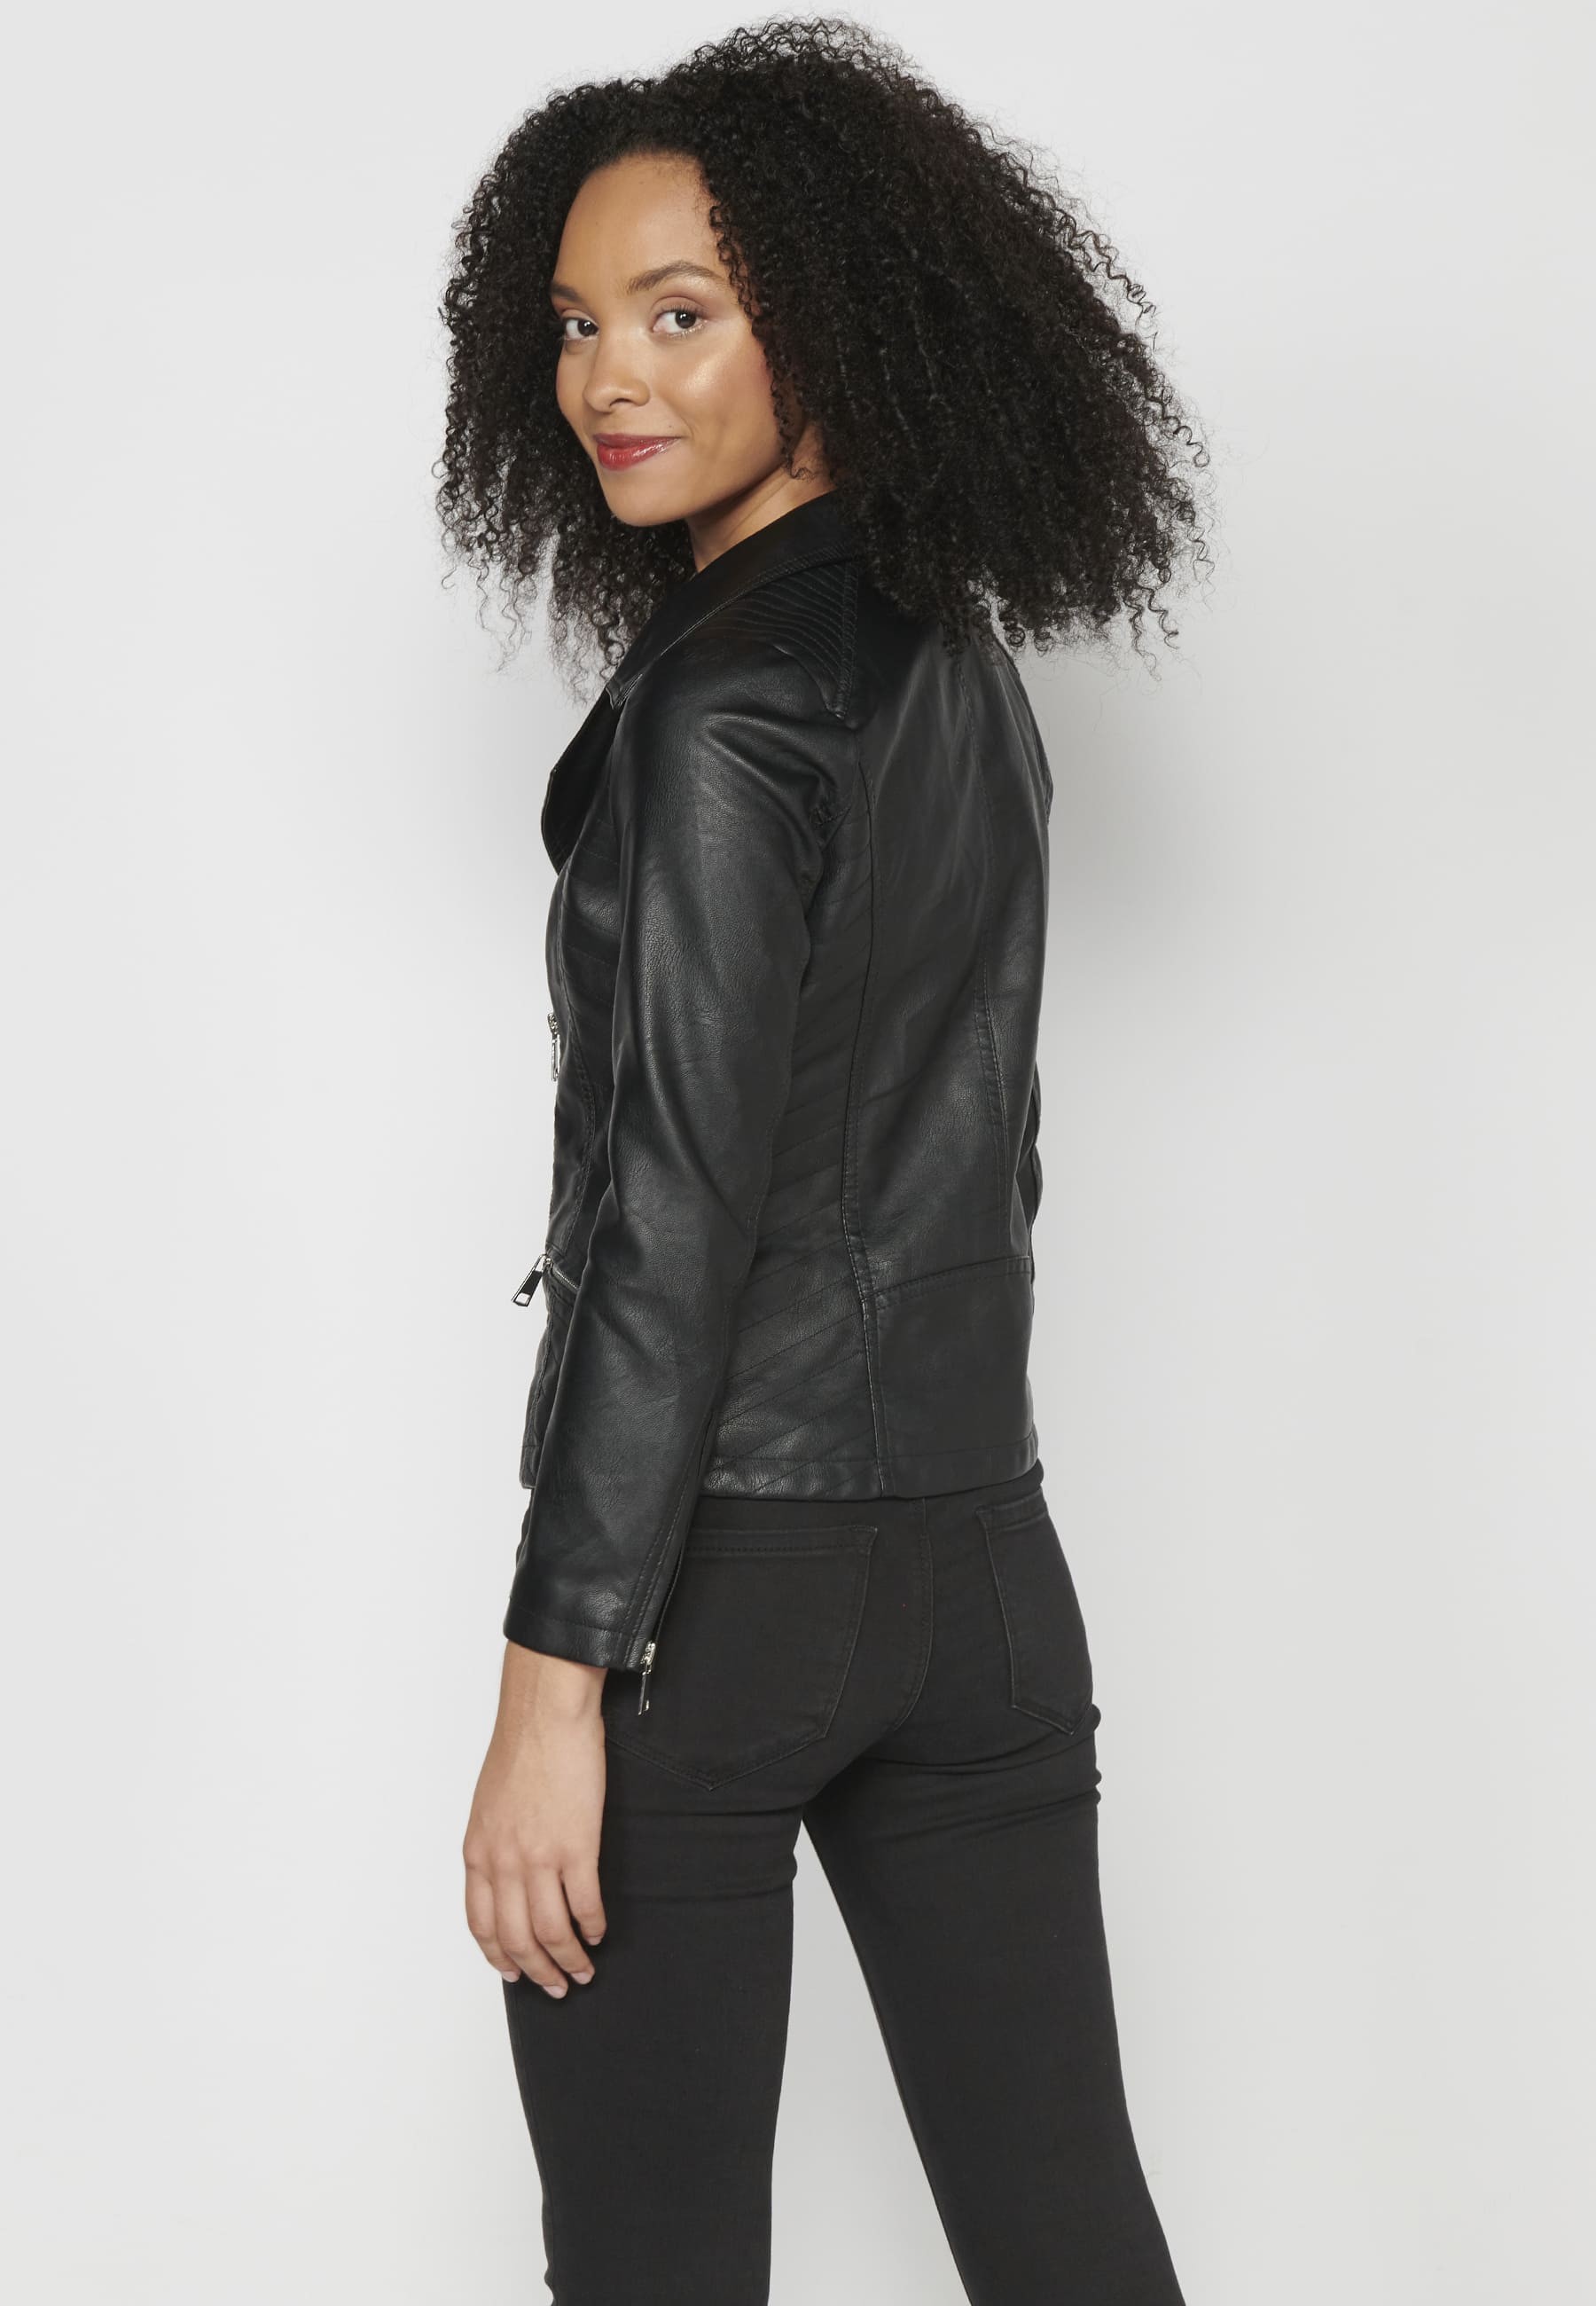 Black Synthetic Leather Jacket for Women